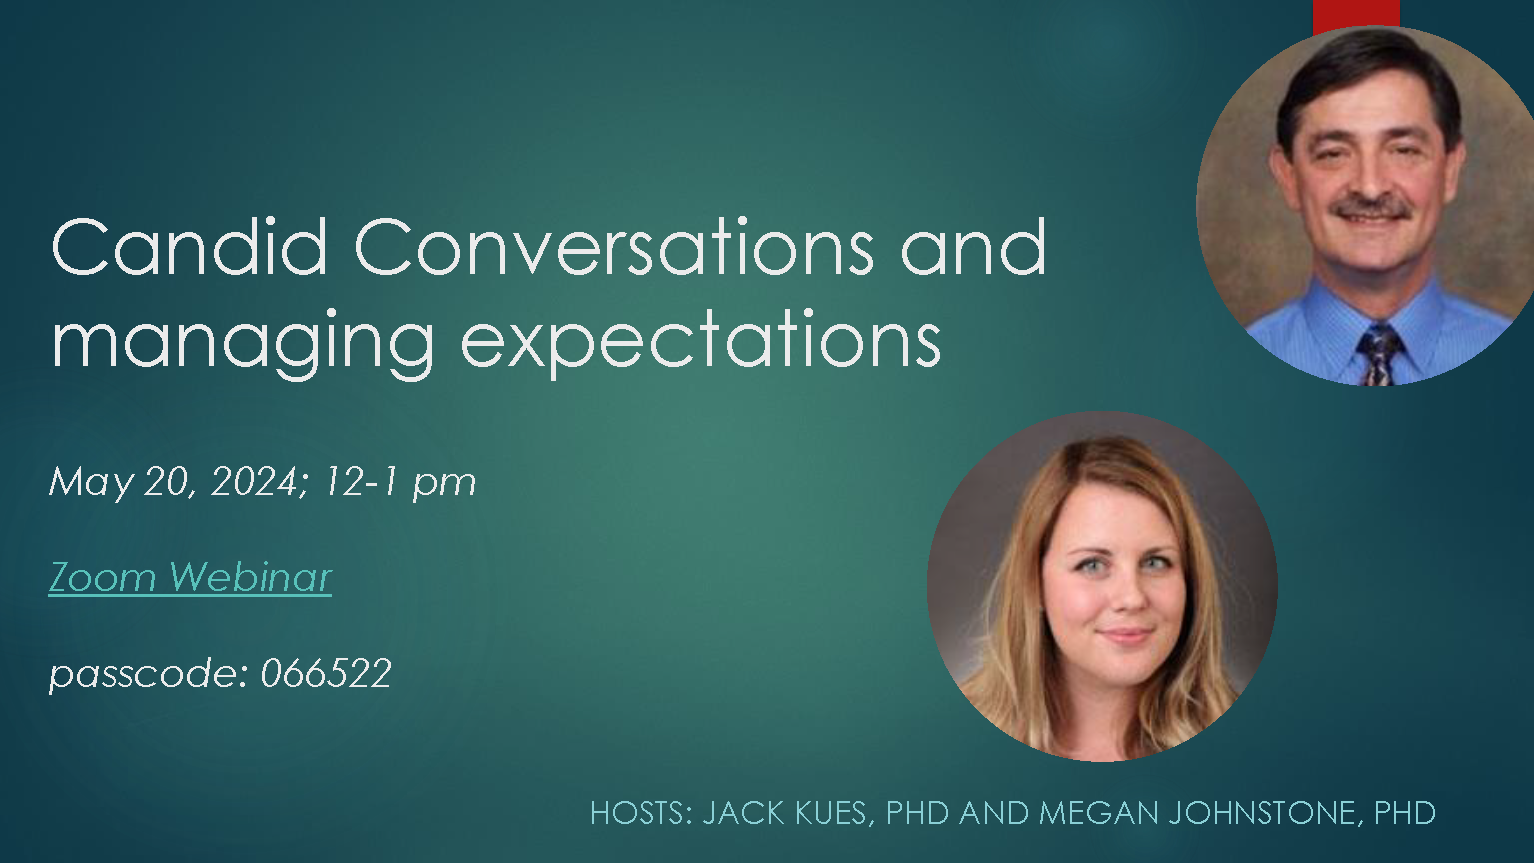 Candid Conversations and managing expectations. May 20,2024; 12-1pm. https://ucincinnati.zoom.us/j/94344970456 passcode: 066522. HOSTS: Jack Kues, PHD and Megan Johnstone, PHD